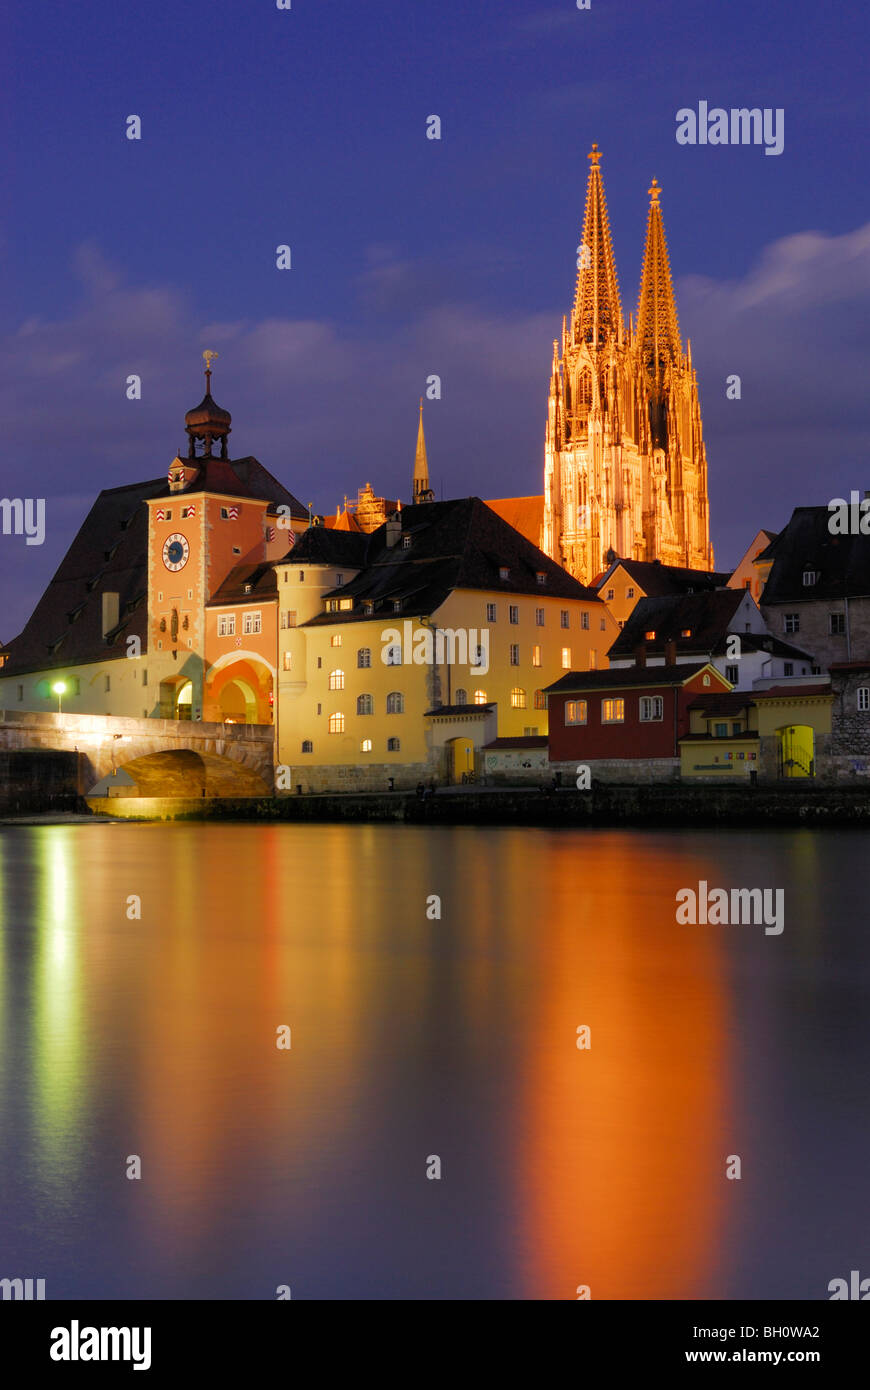 View to Old town with Regensburg cathedral at night, Regensburg, Upper Palatinate, Bavaria, Germany Stock Photo